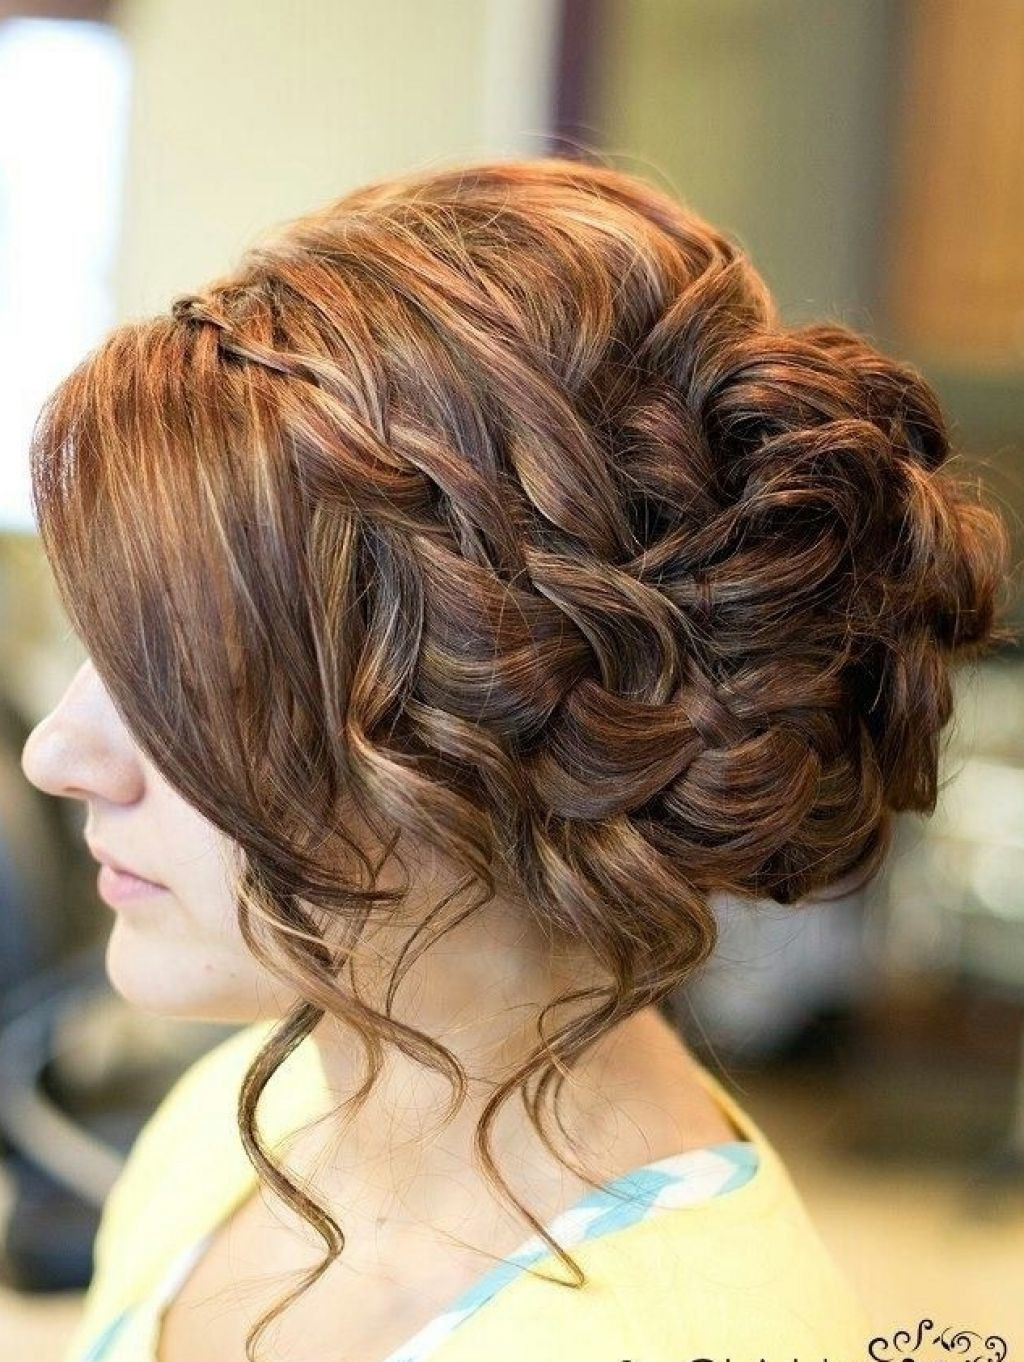 Prom Hairstyles Buns
 14 Prom Hairstyles for Long Hair that are Simply Adorable